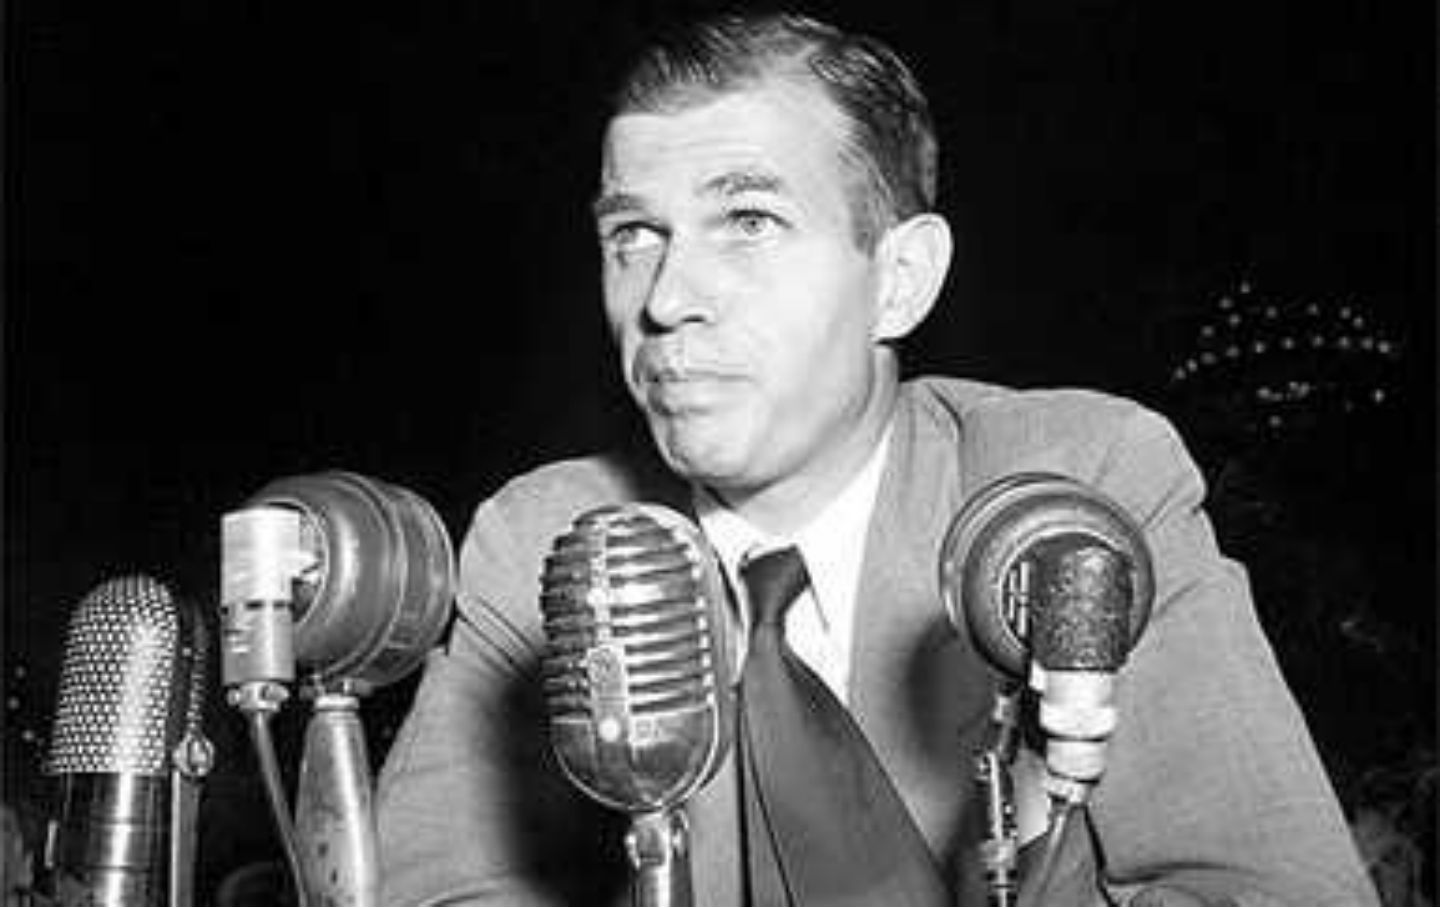 August 3, 1948: Whittaker Chambers Accuses Alger Hiss of Being a Communist